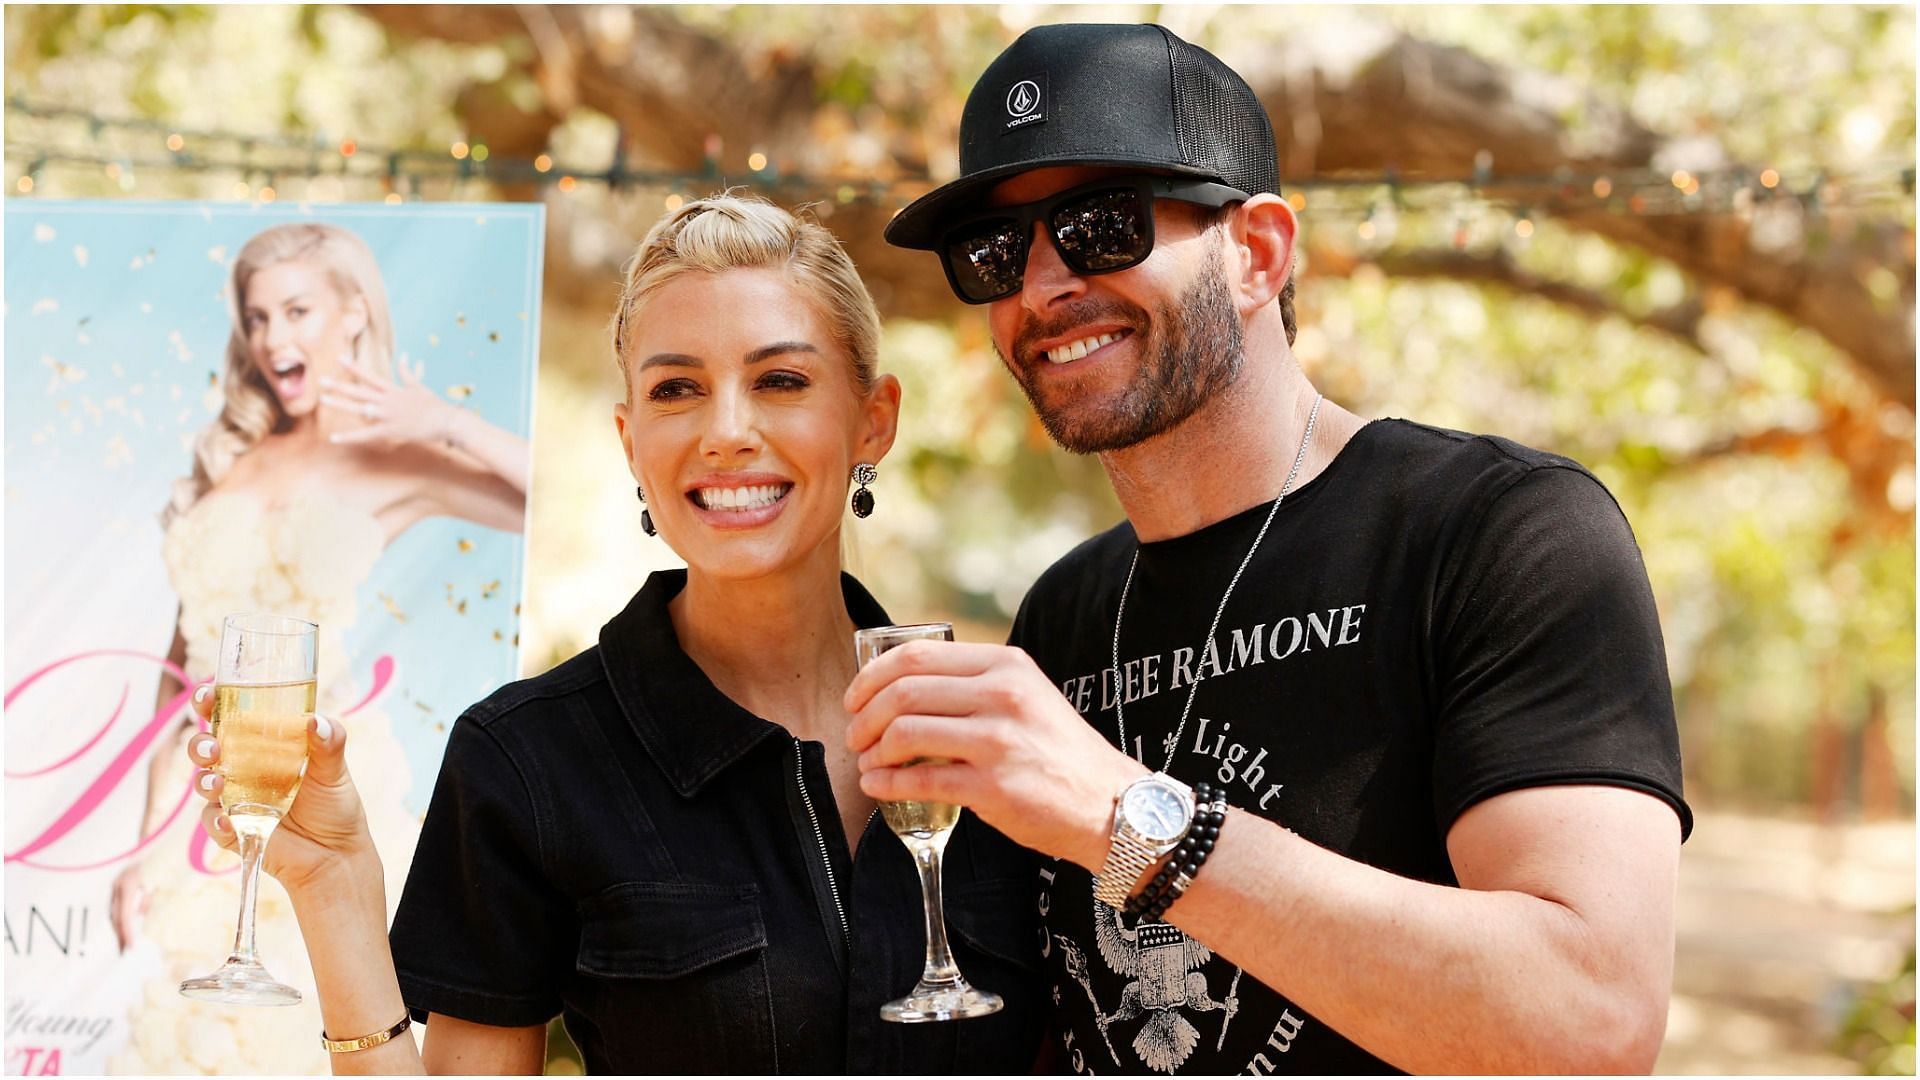 Heather Rae Young and Tarek El Moussa attend the PETA bridal shower in September 2021 (Image via Getty Images)